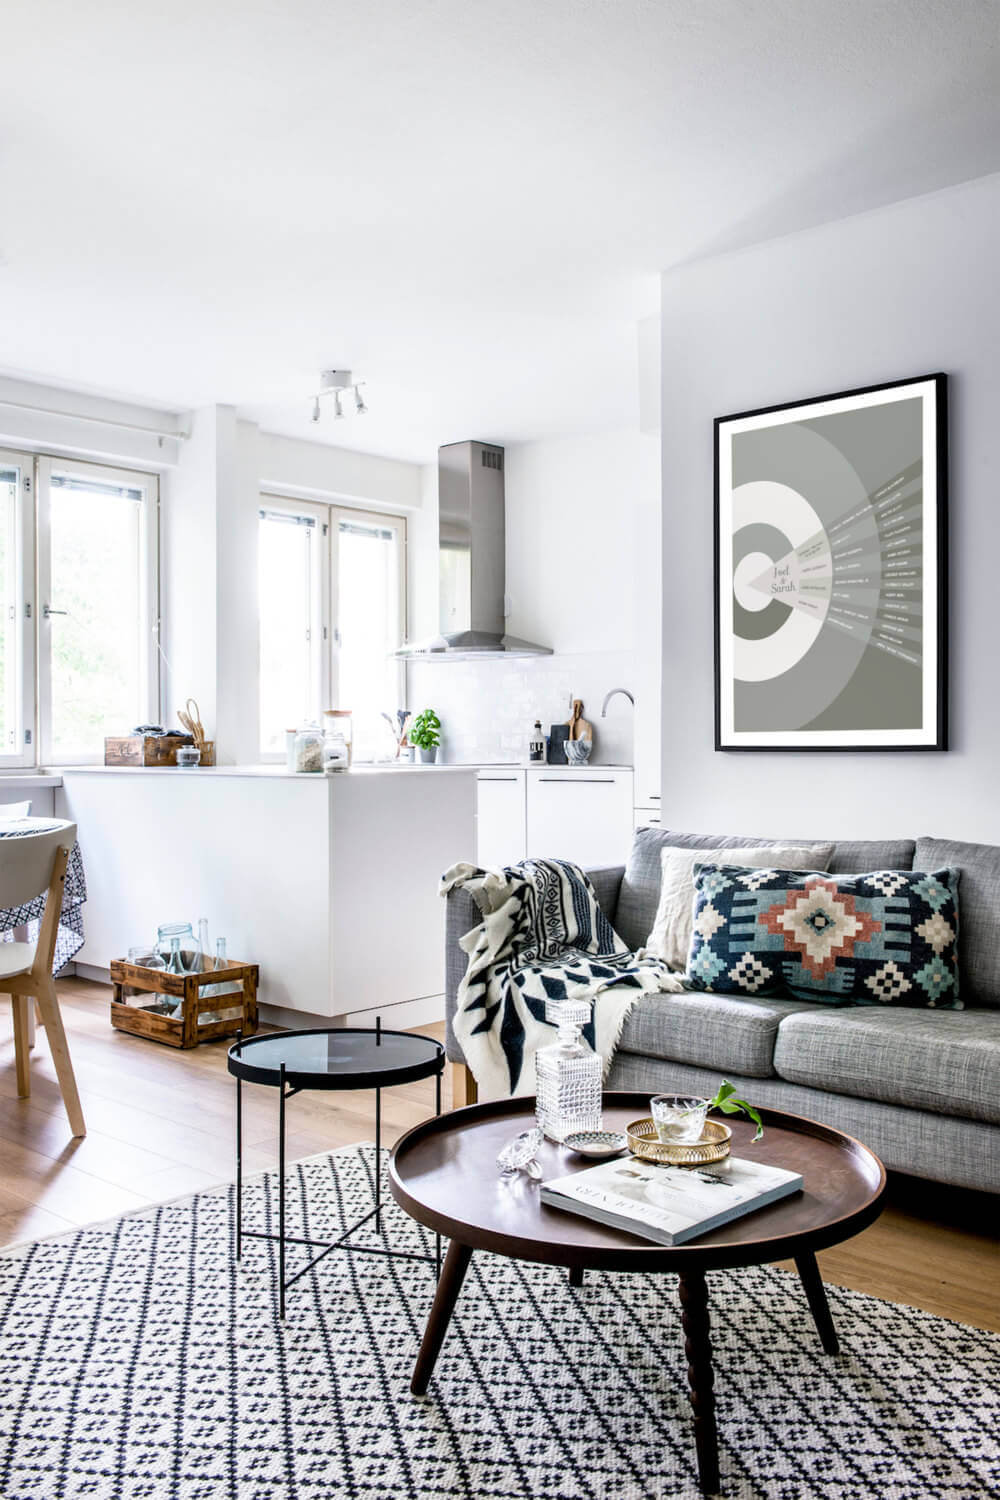 12. Open plan living room in gray and white